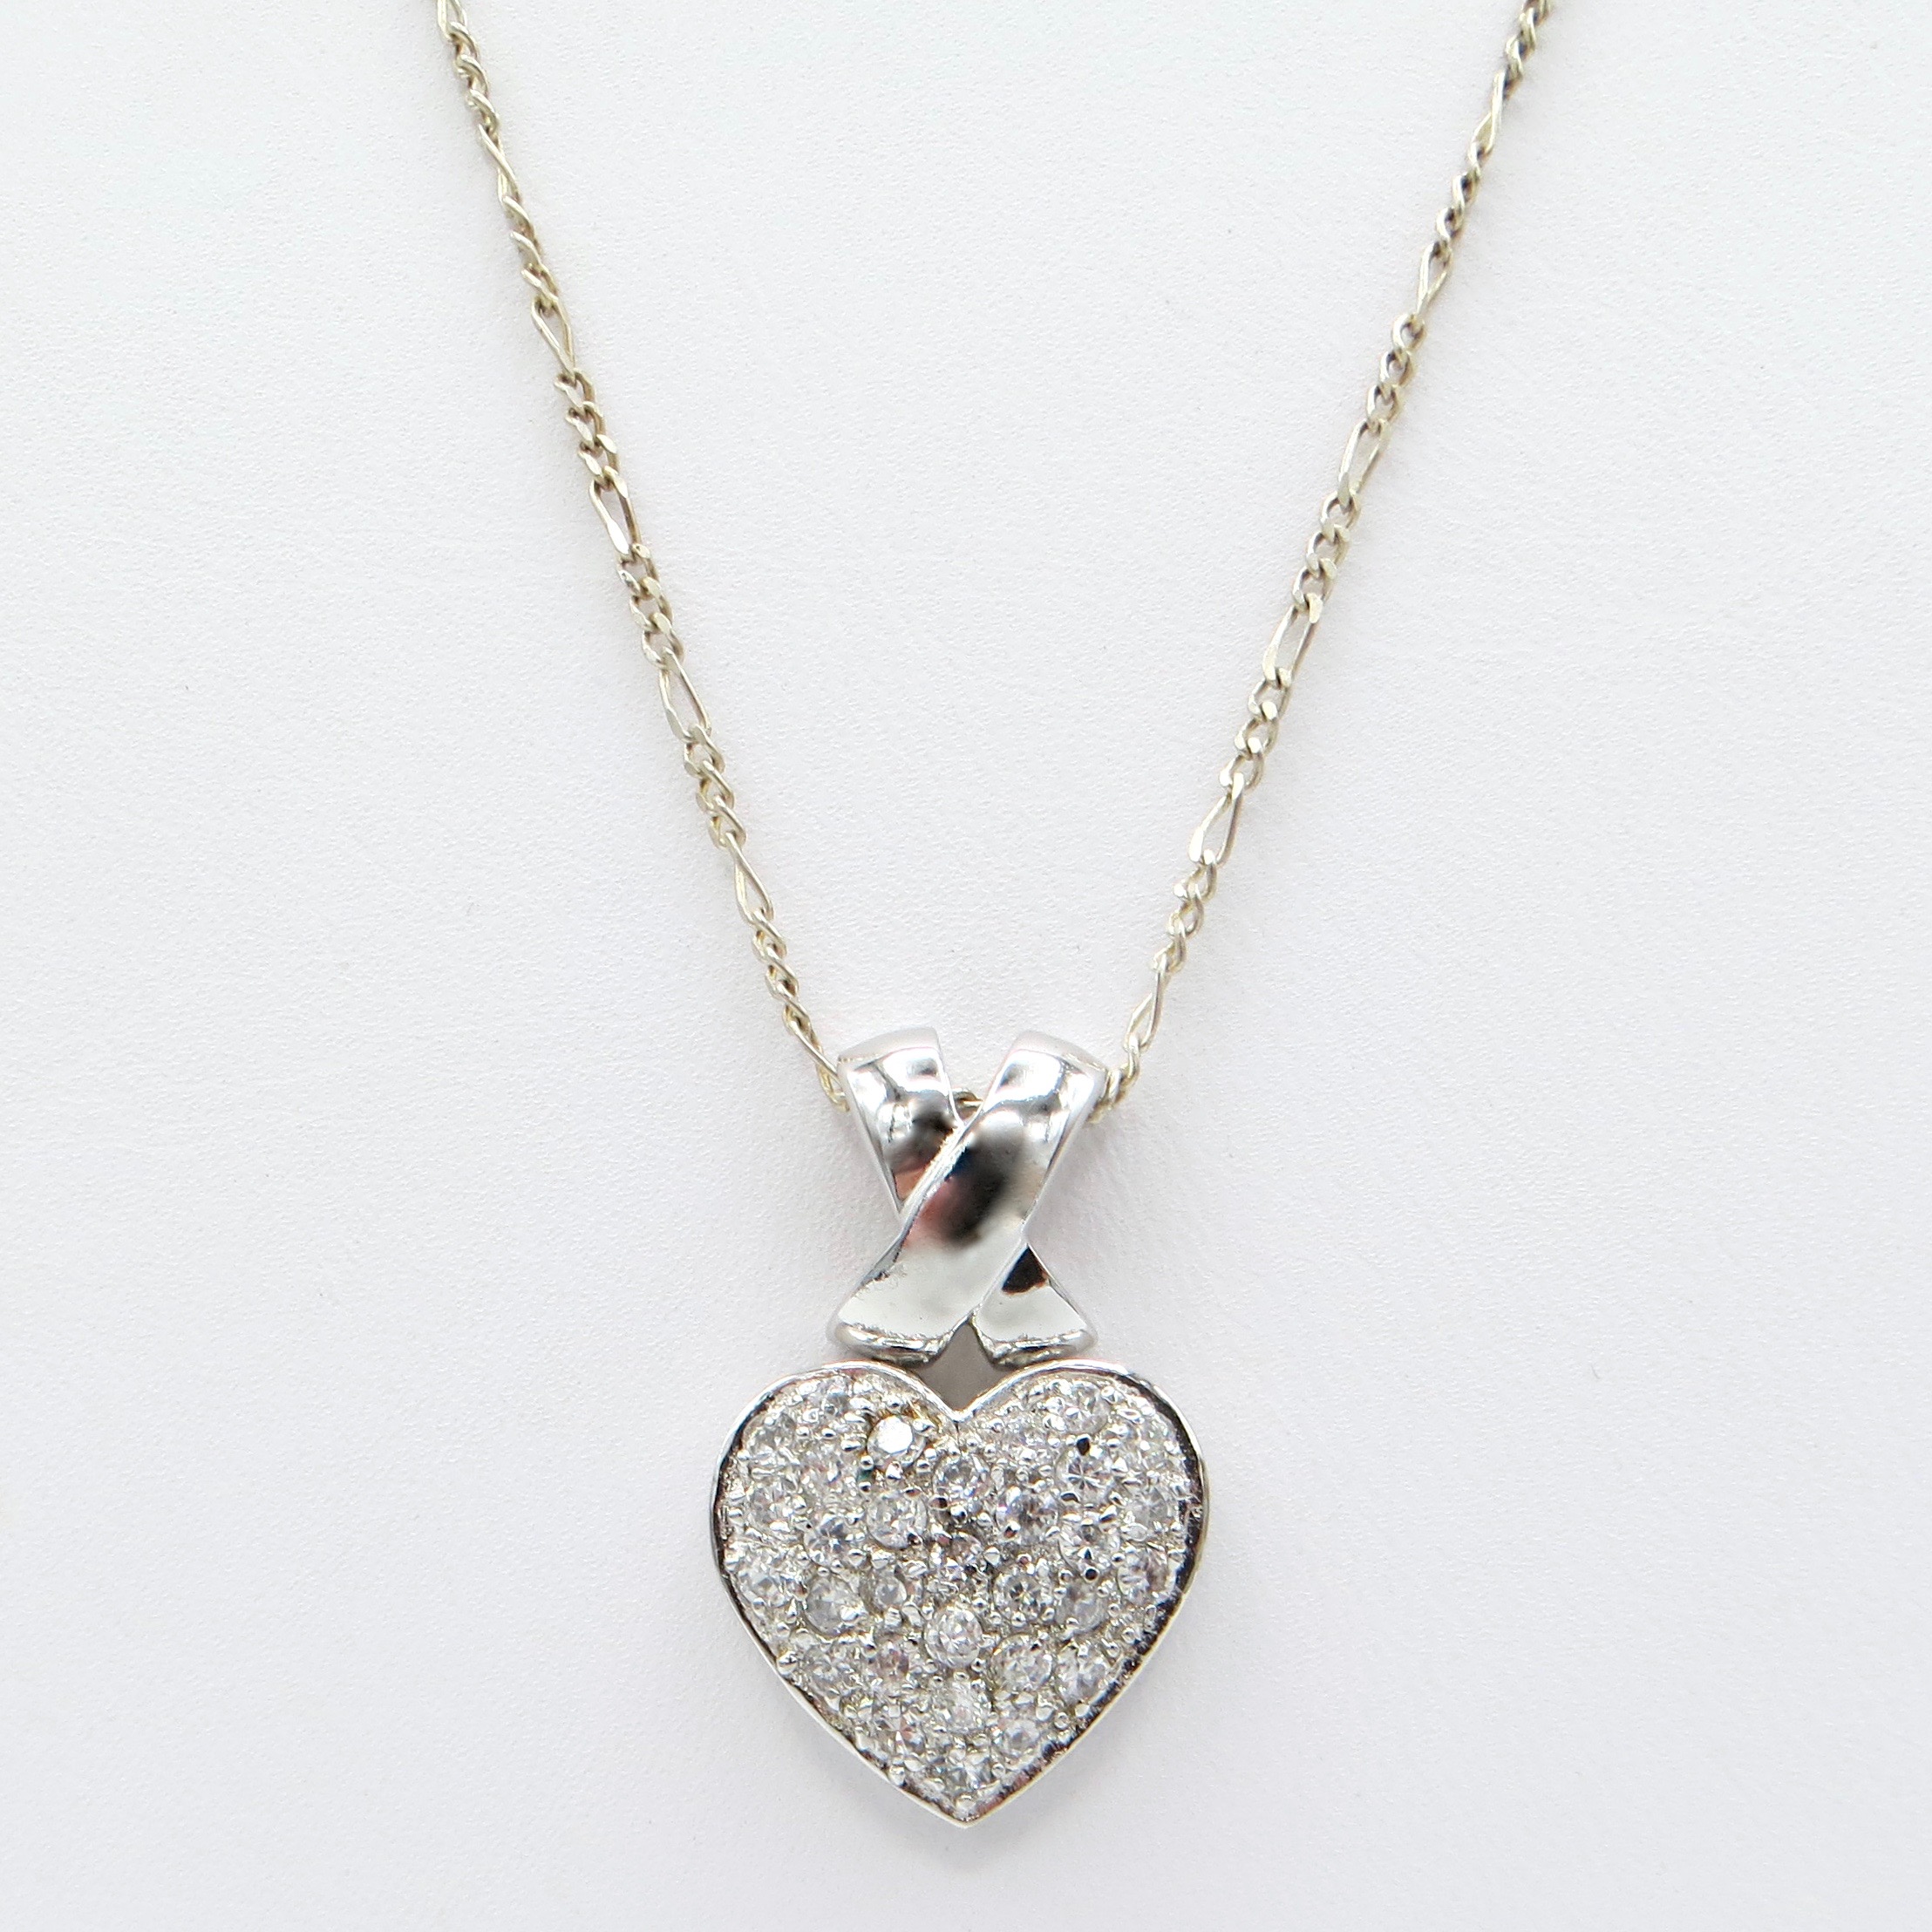 Sterling Silver and Crystal Heart Necklace